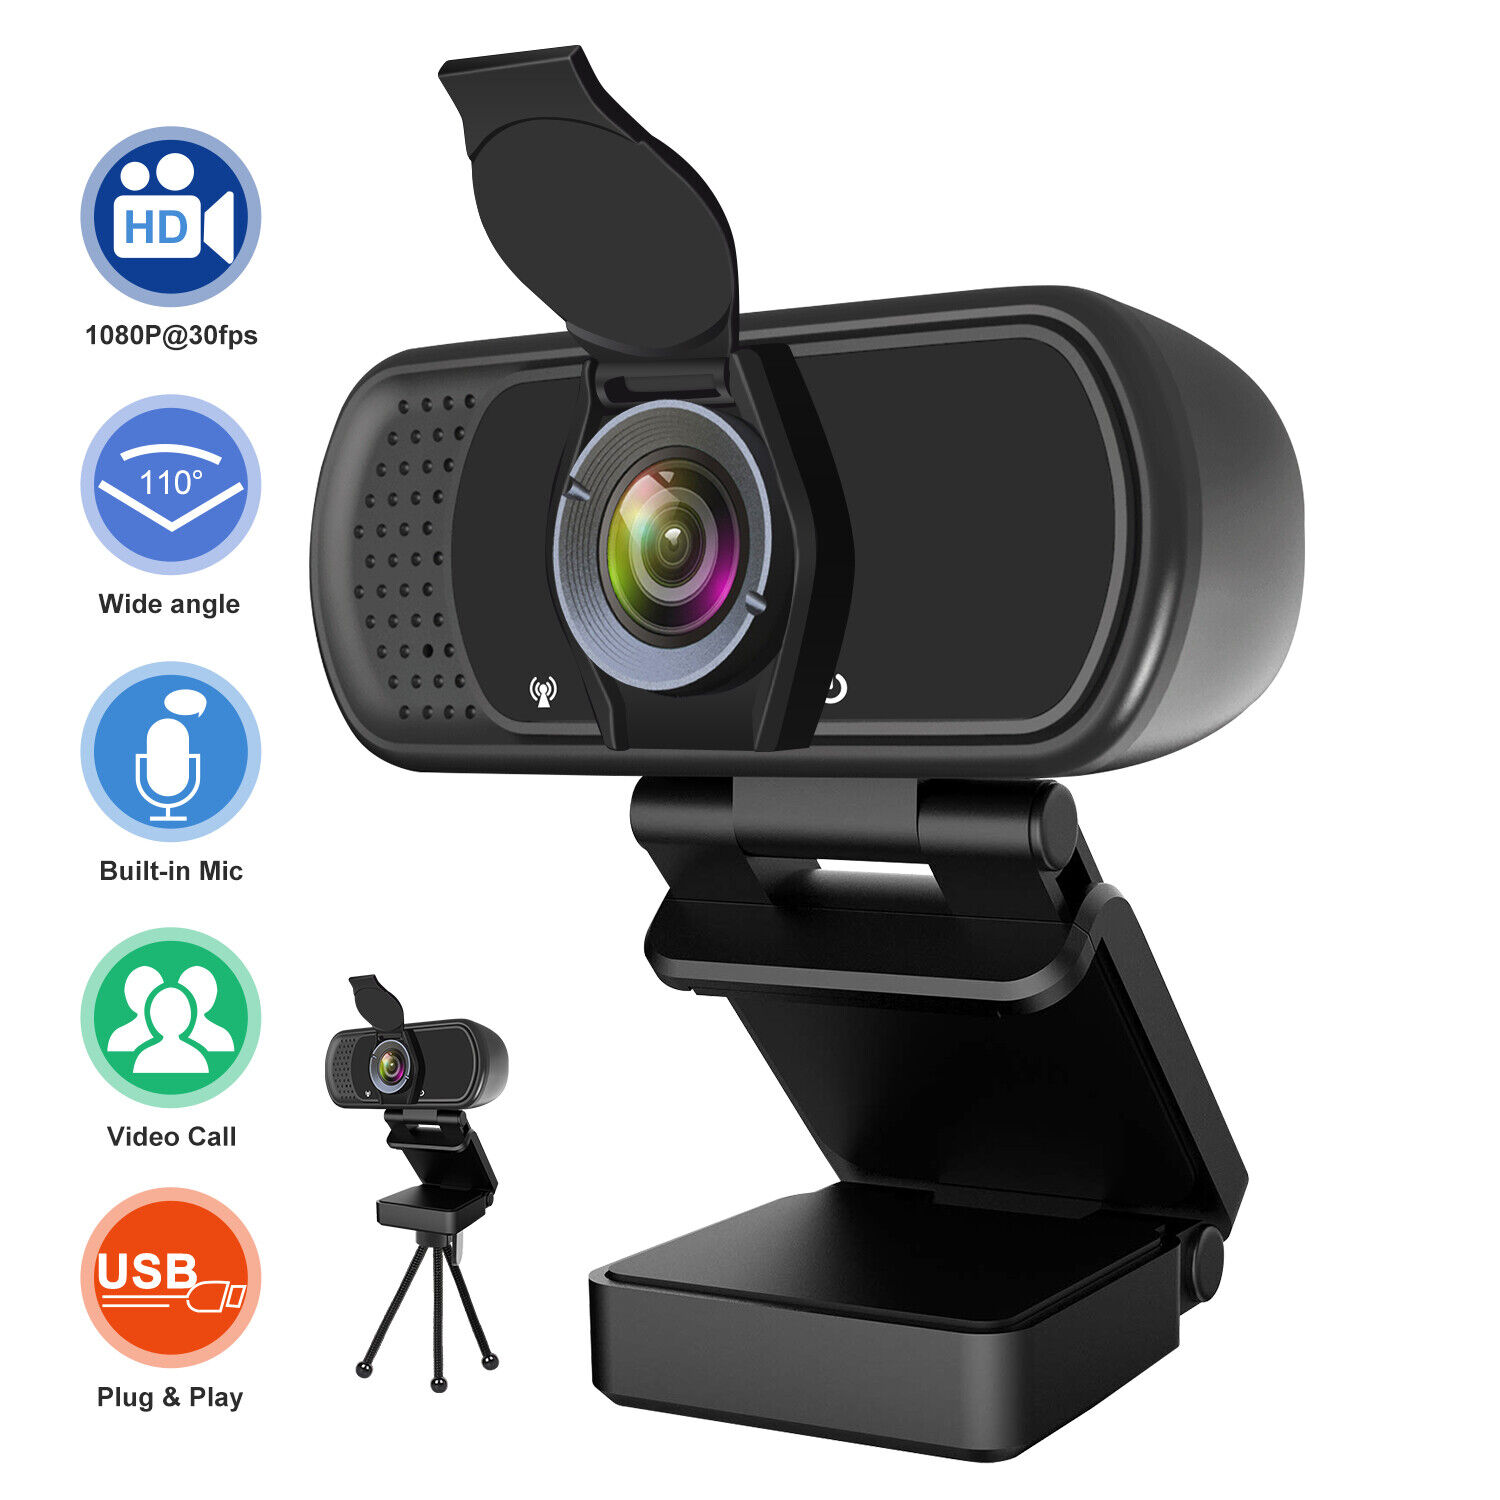 For Pc Desktop & Laptop Web Camera With Microphone/fhd